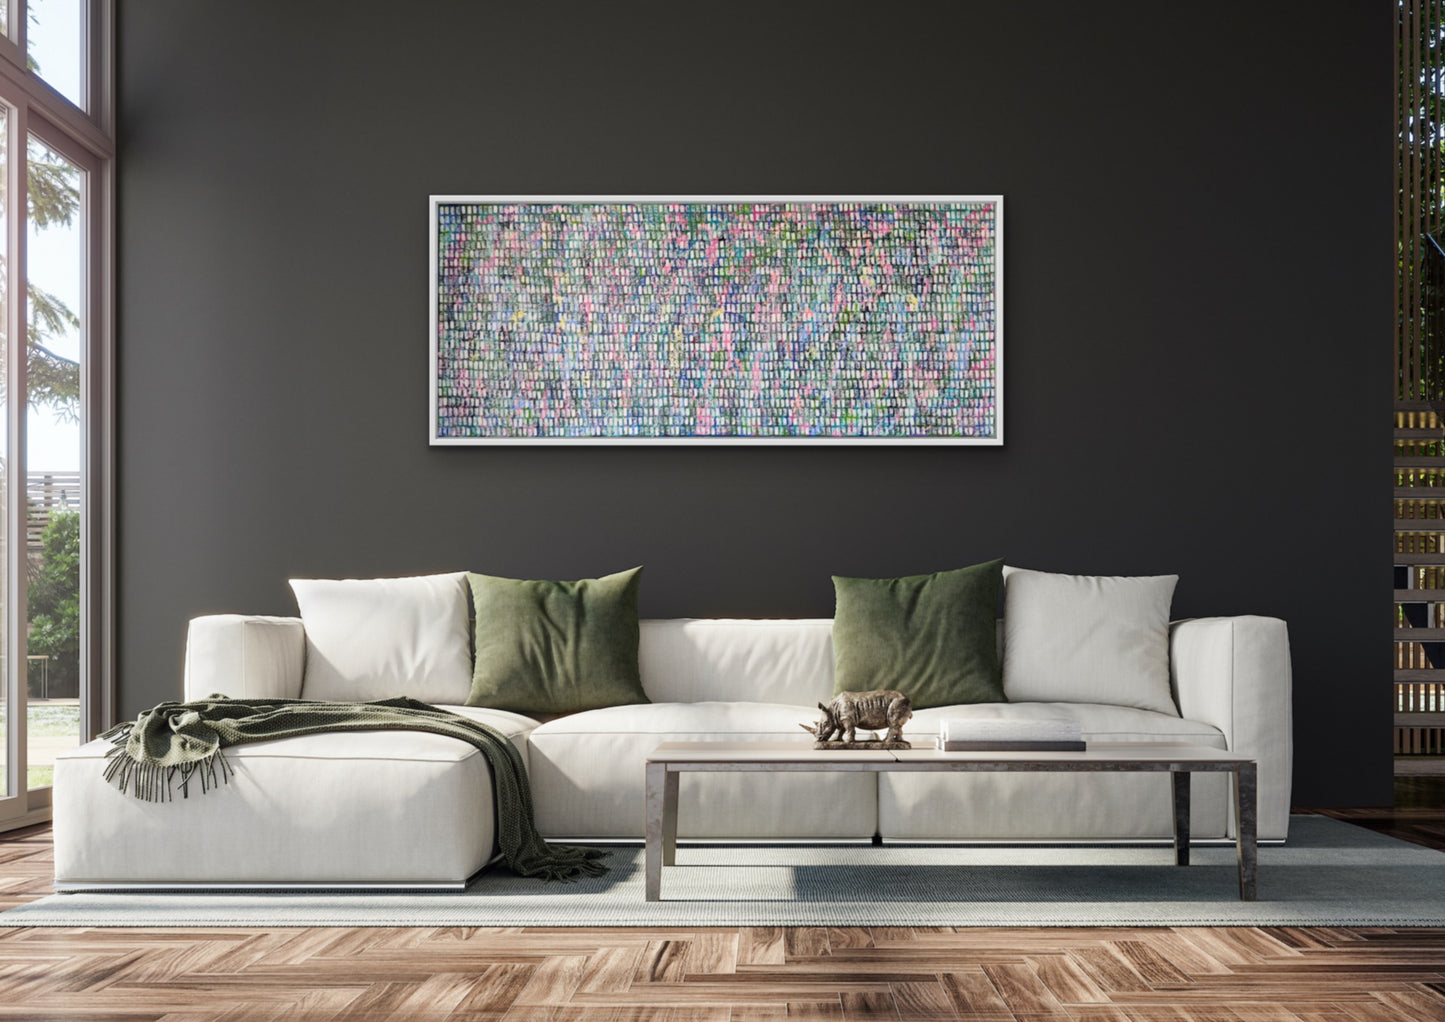 Blooming Happiness | 60" x 24" | Acrylic on Canvas